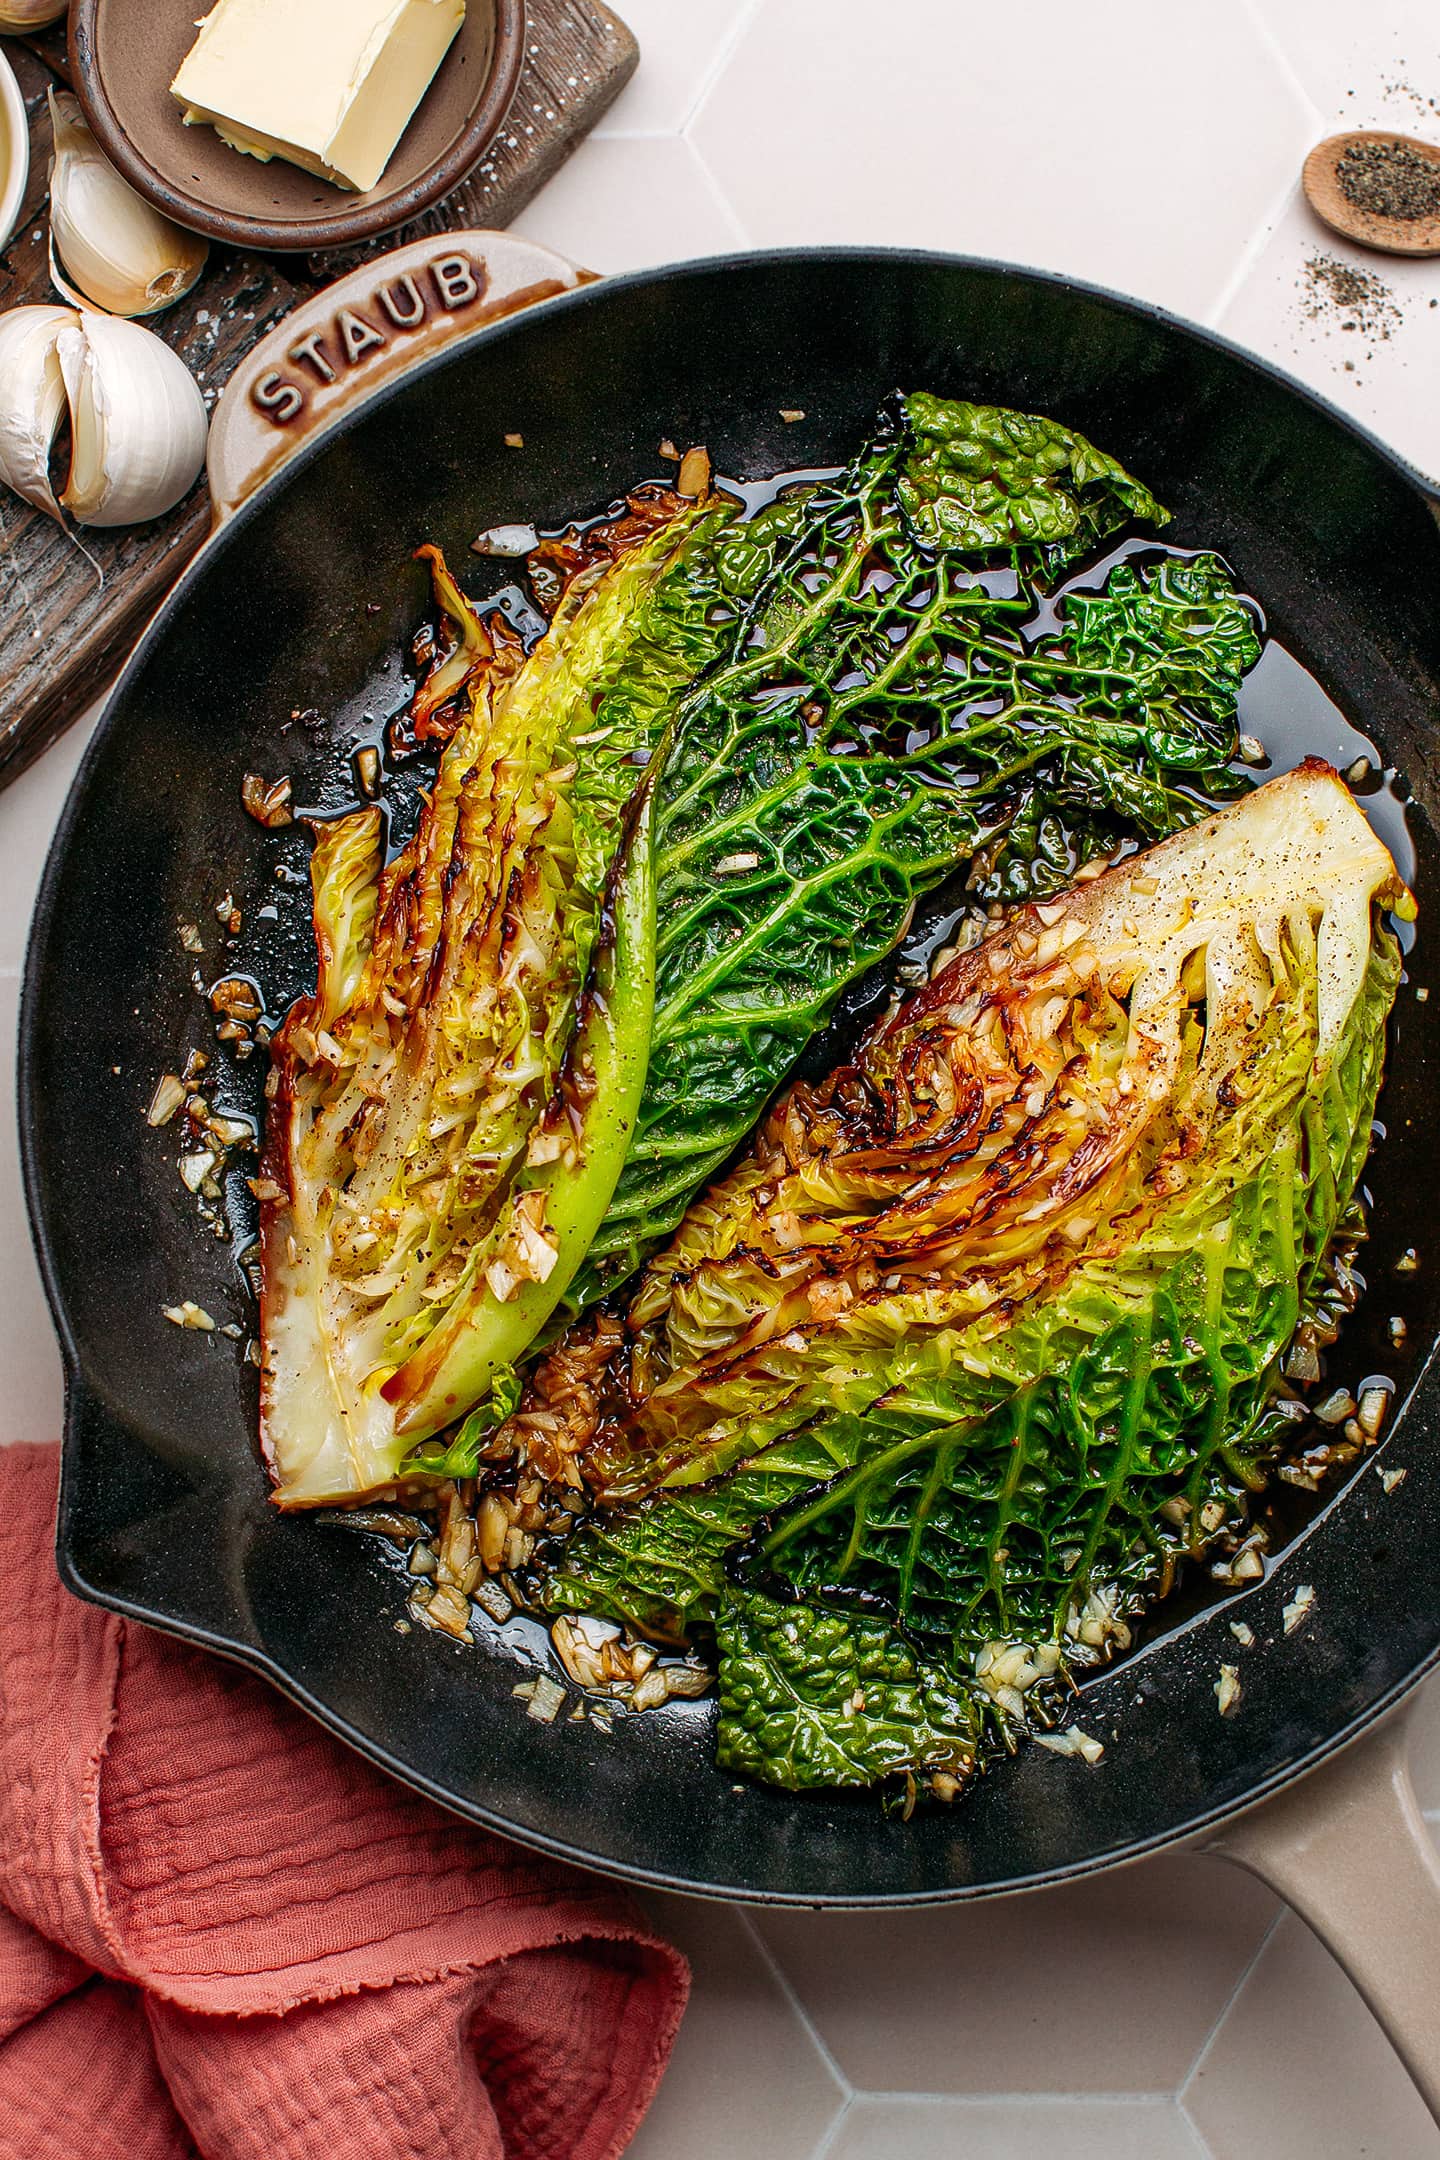 Braised cabbage with garlic in a skillet.